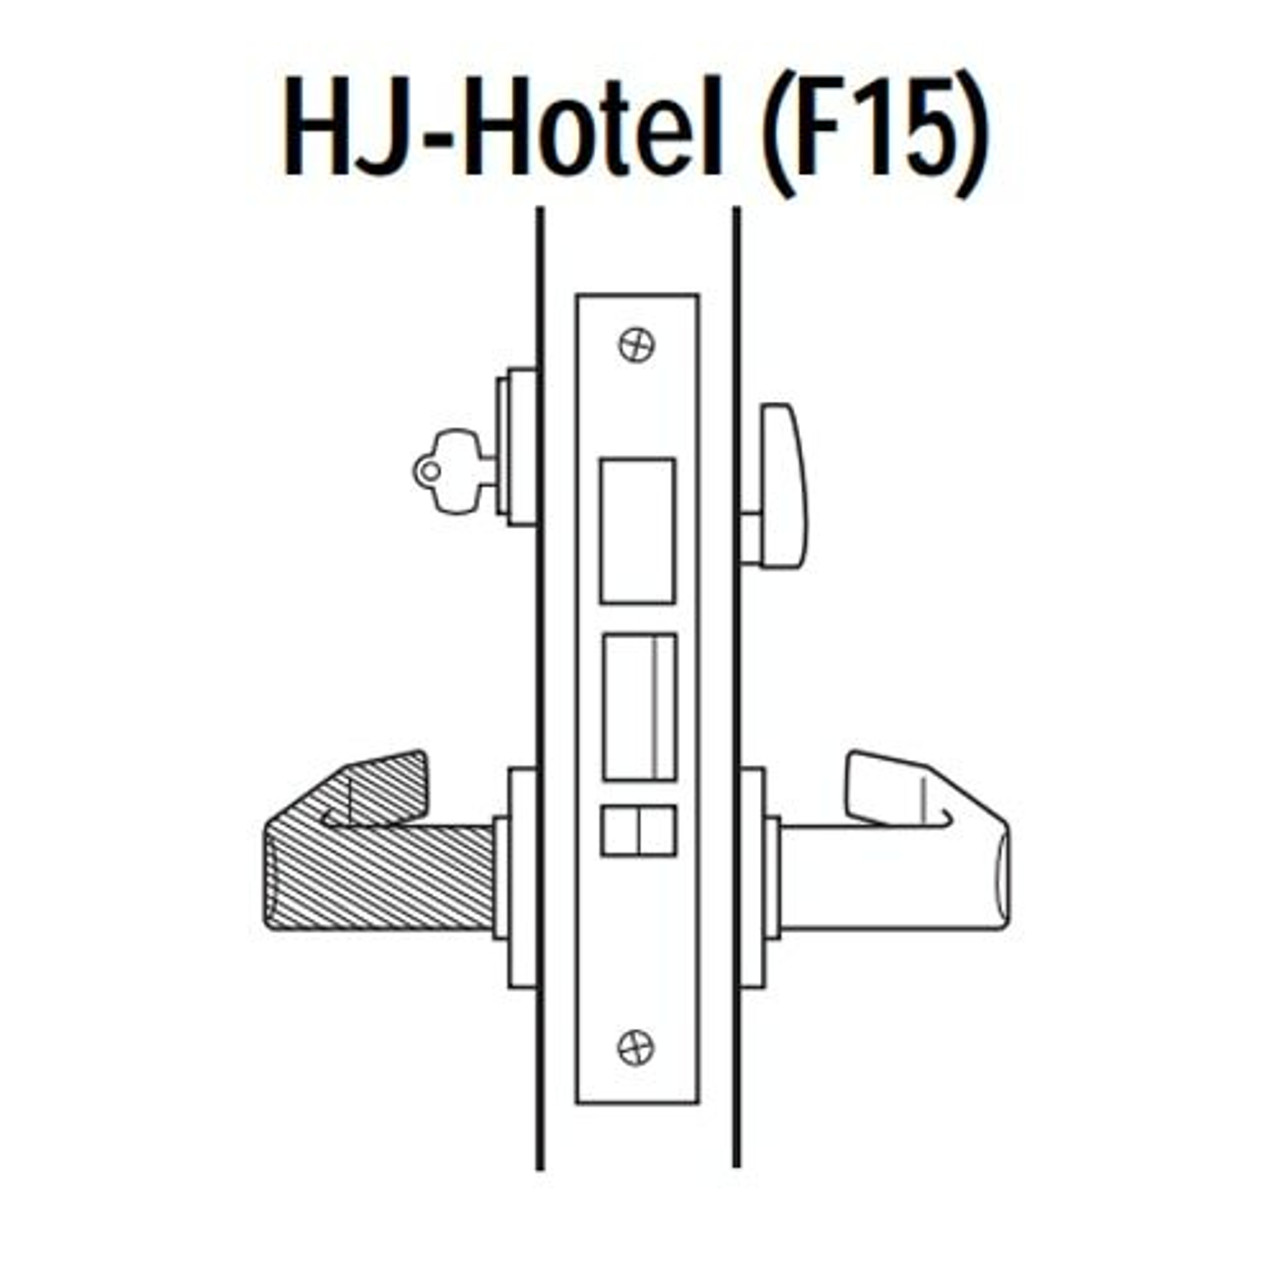 45H7HJ17RM625 Best 40H Series Hotel with Deadbolt Heavy Duty Mortise Lever Lock with Gull Wing RH in Bright Chrome